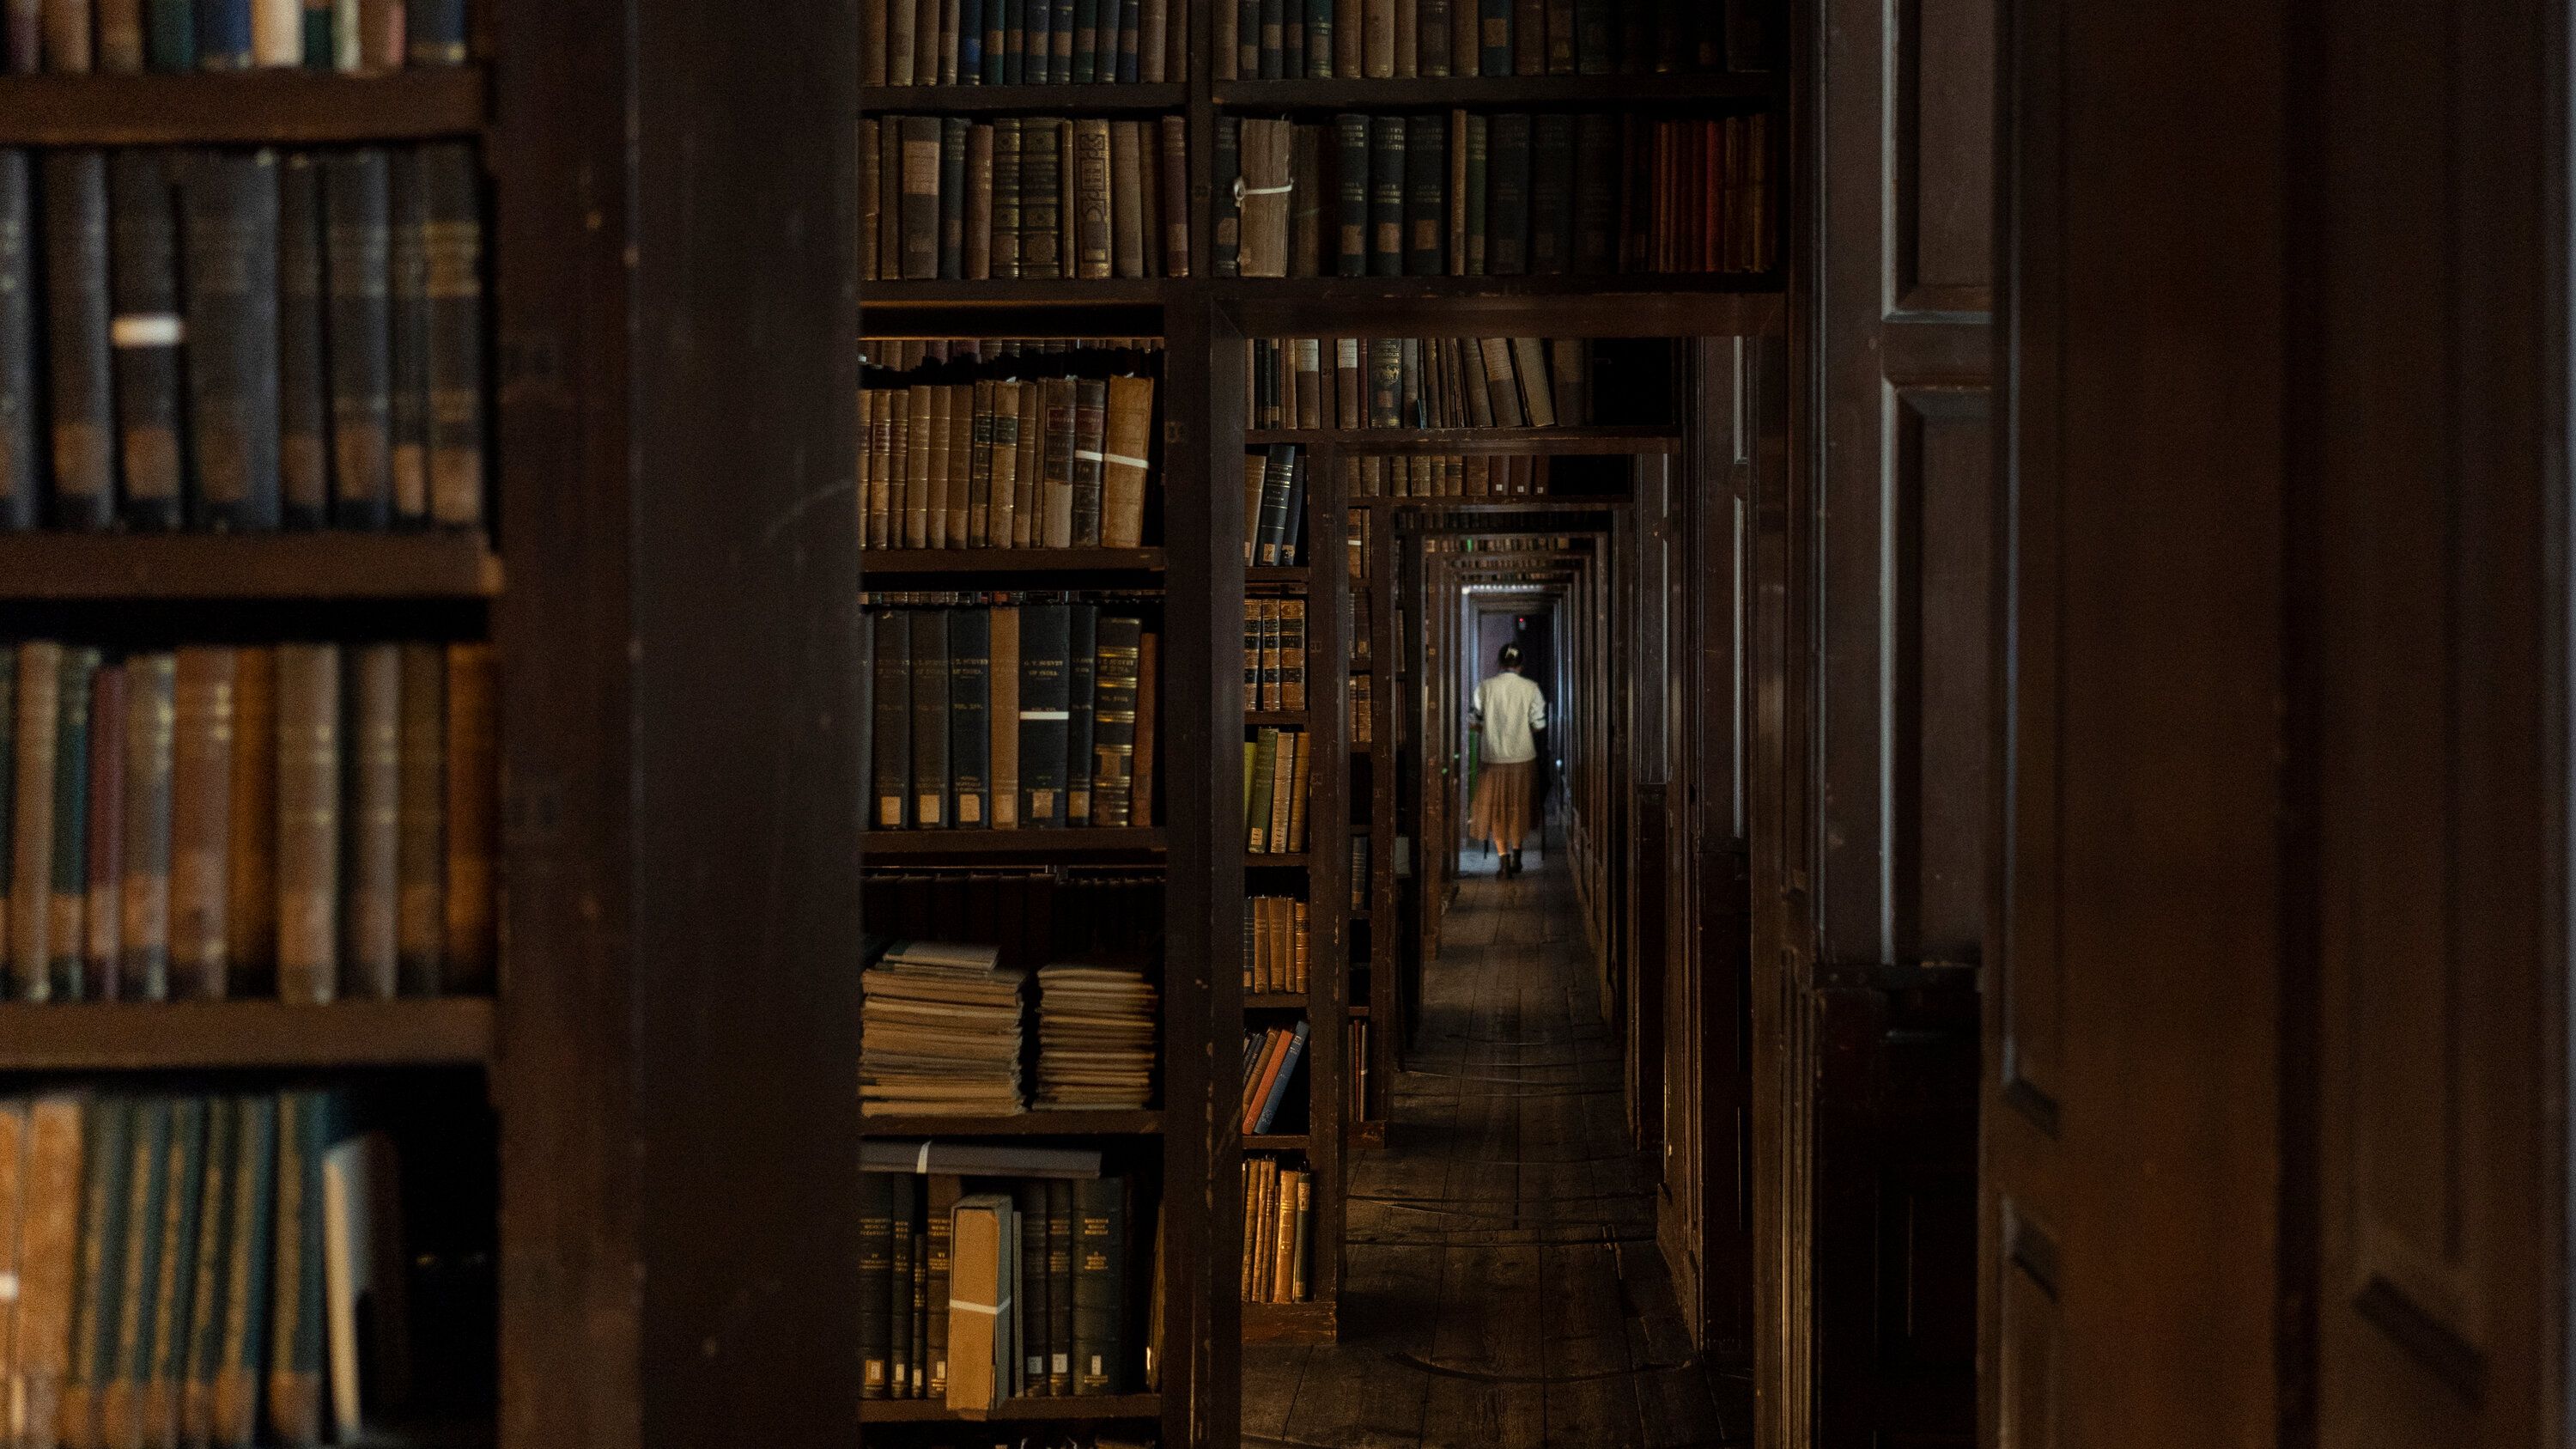 A person standing in a dimly lit library surrounded by book shelves - Dark academia